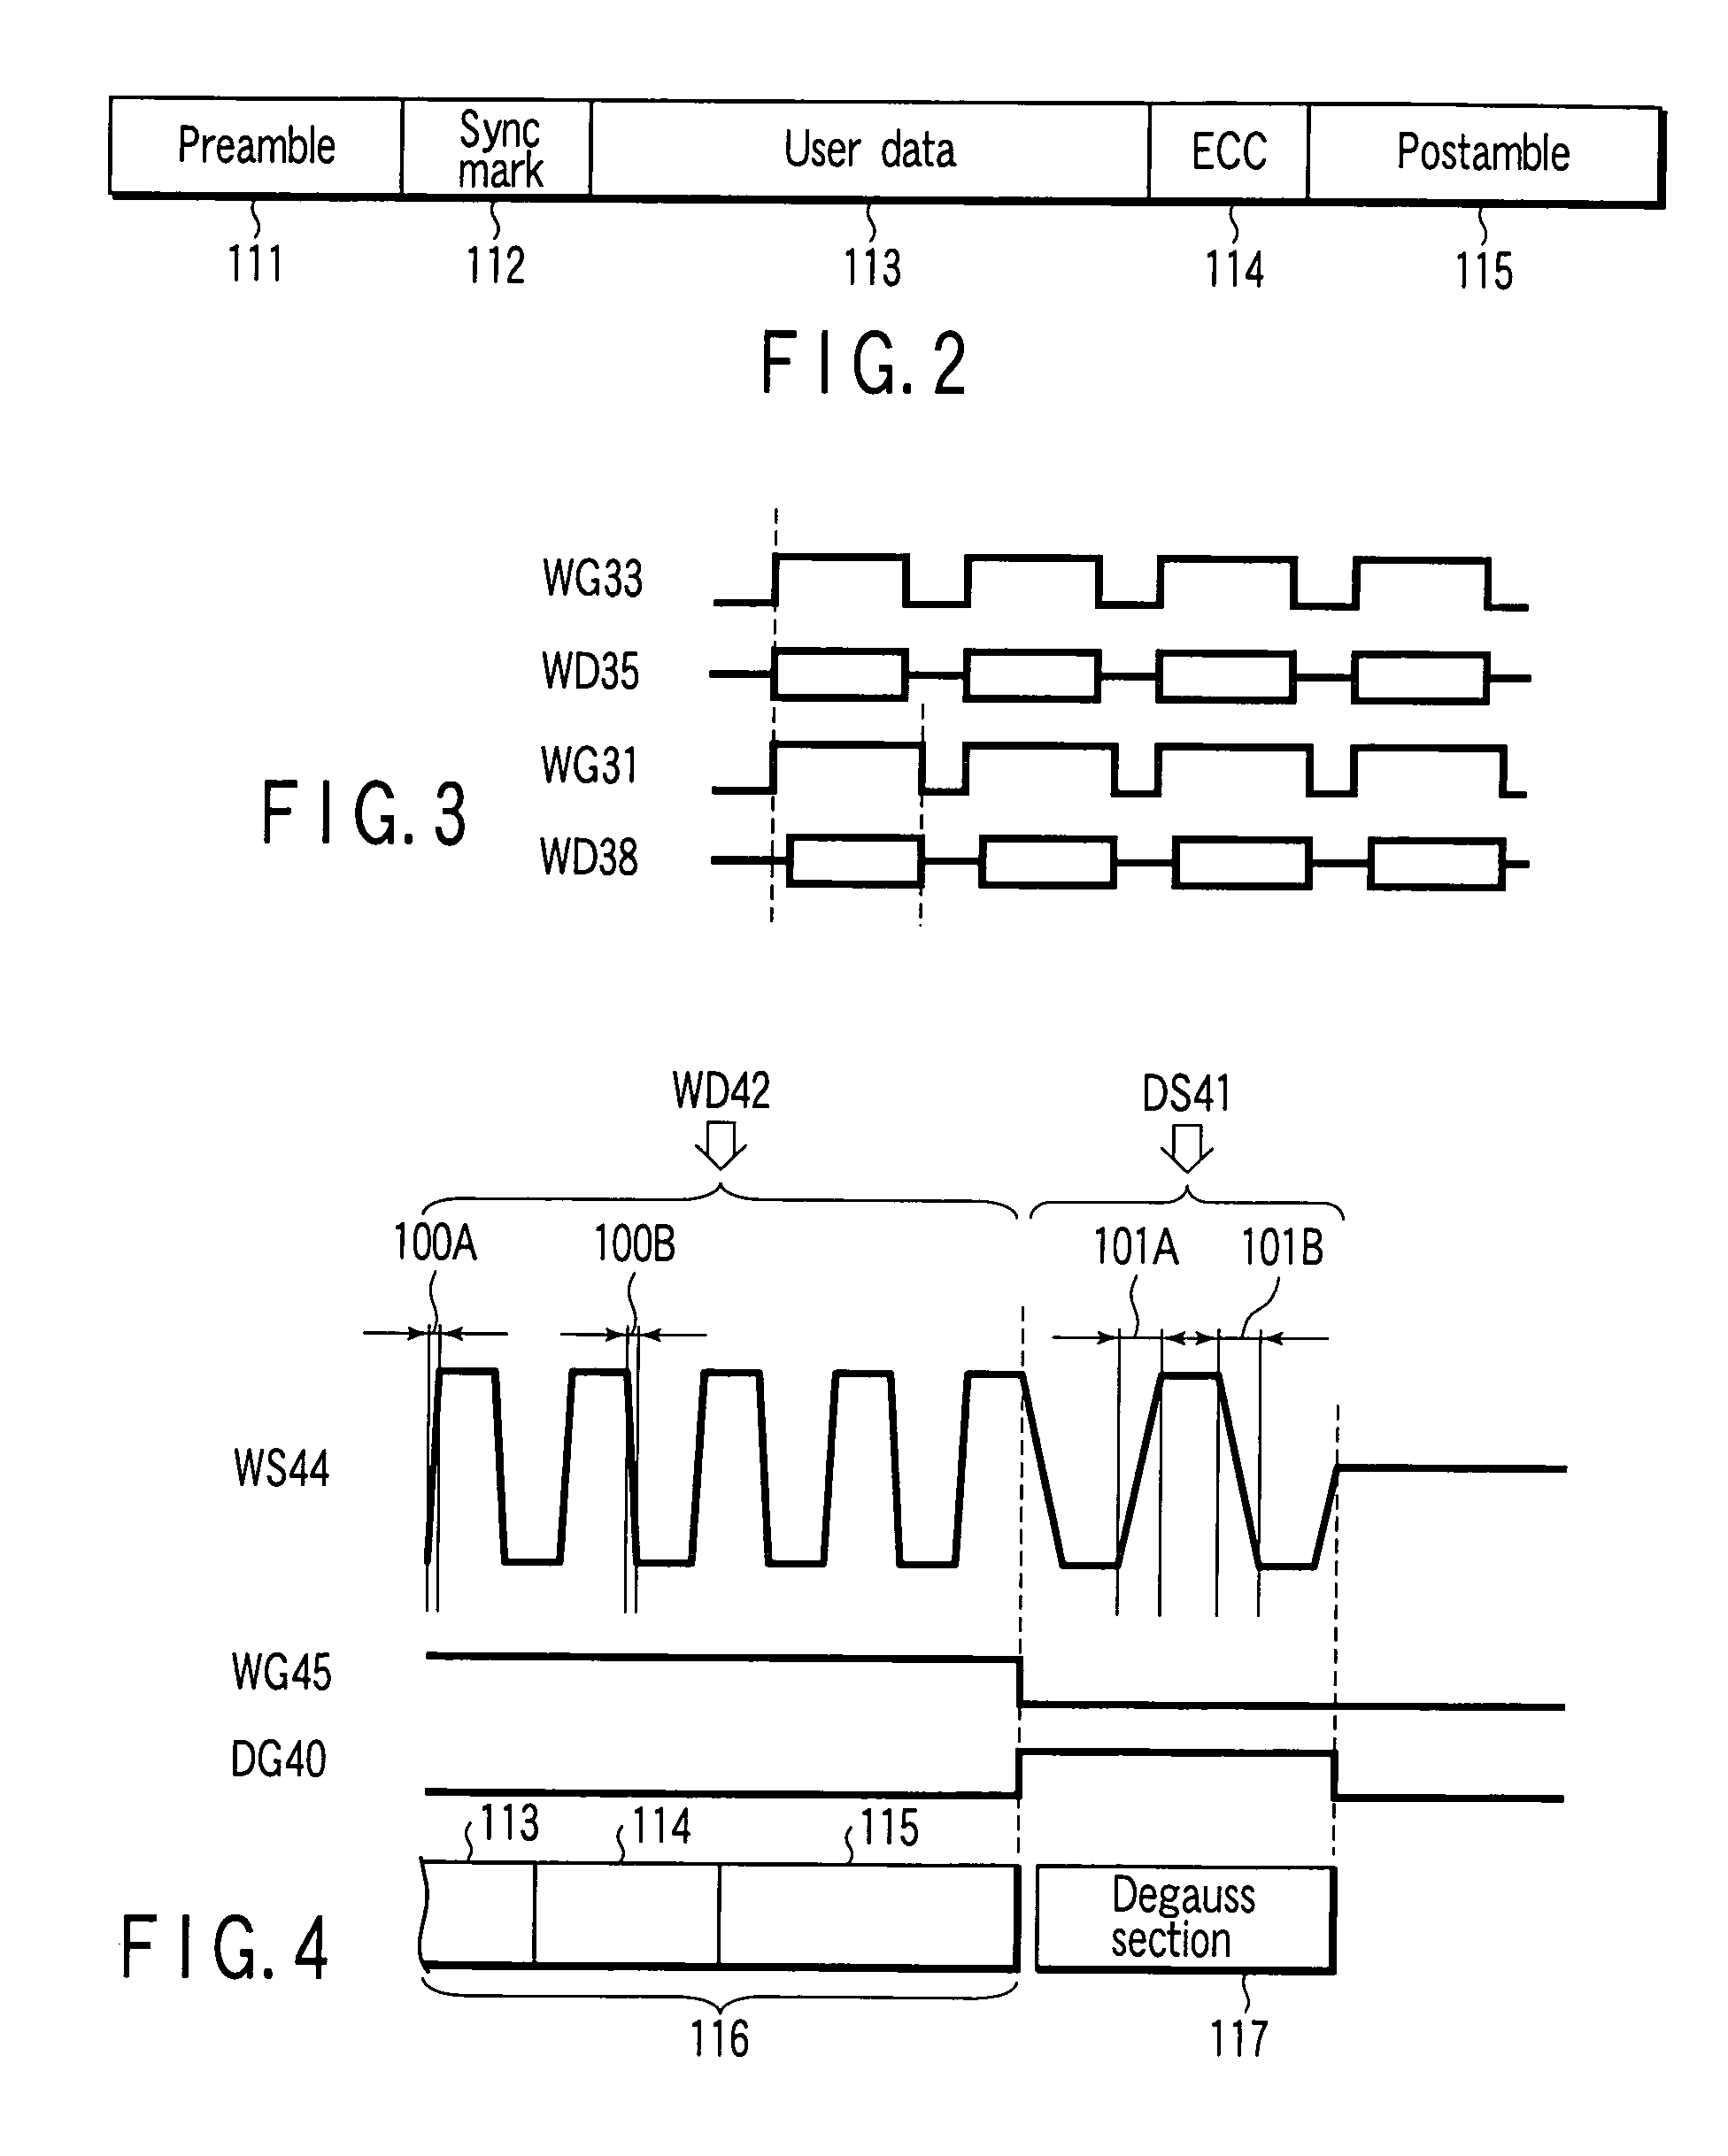 Head amplifier circuit with function for degaussing residual magnetism of recording head